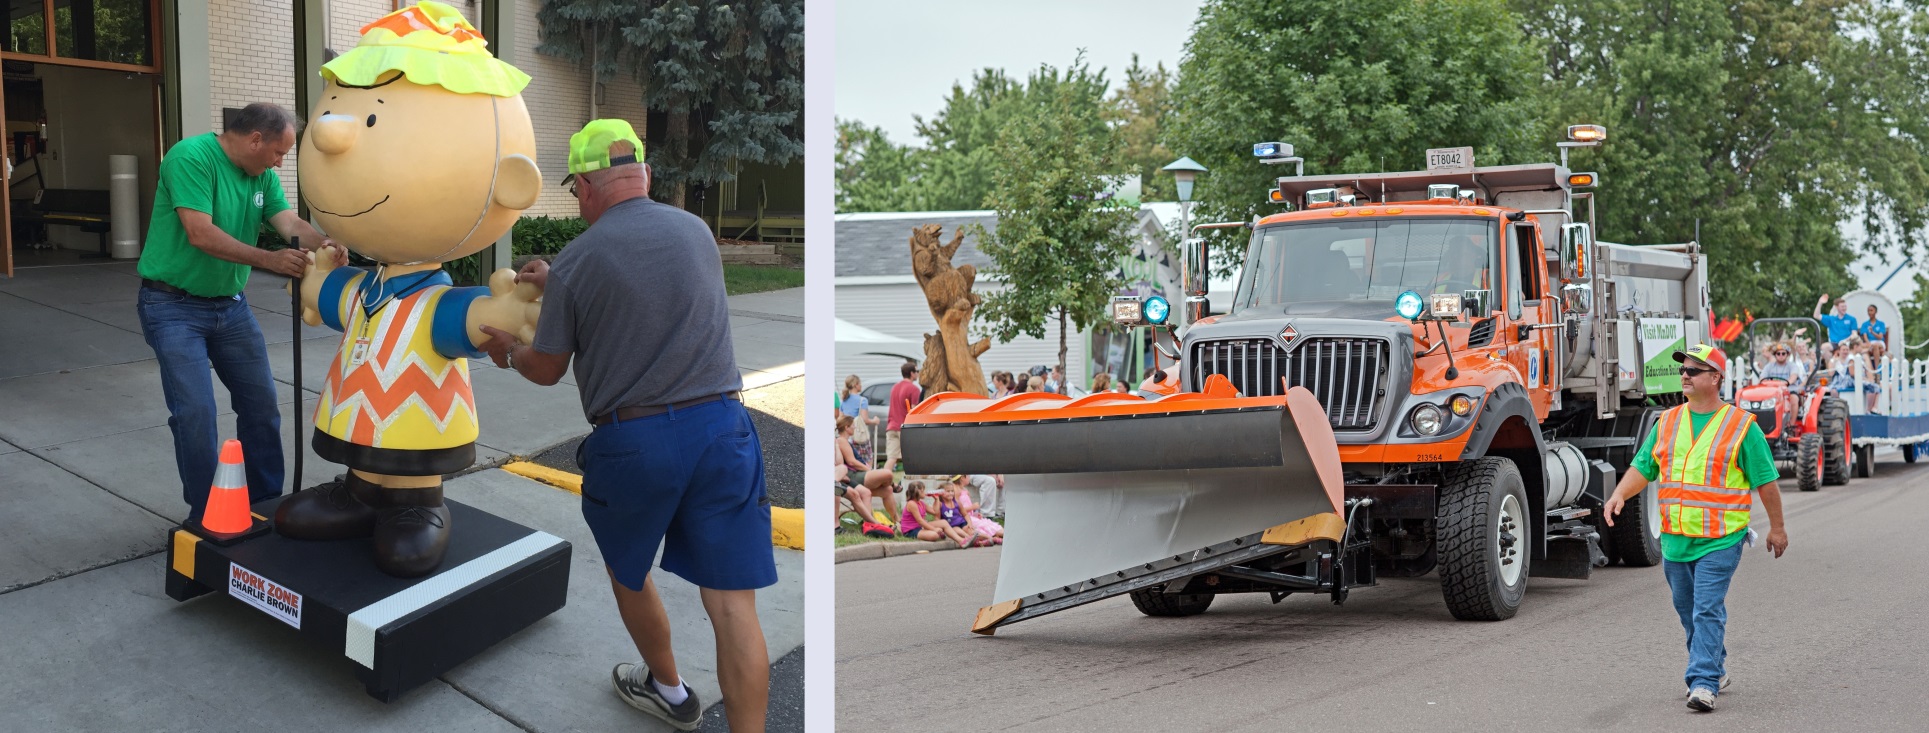 Two photos: one shows two men moving a large statue of Charlie Brown dressed in road safety gear, and the other shows a MnDOT plow truck in a State Fair parade